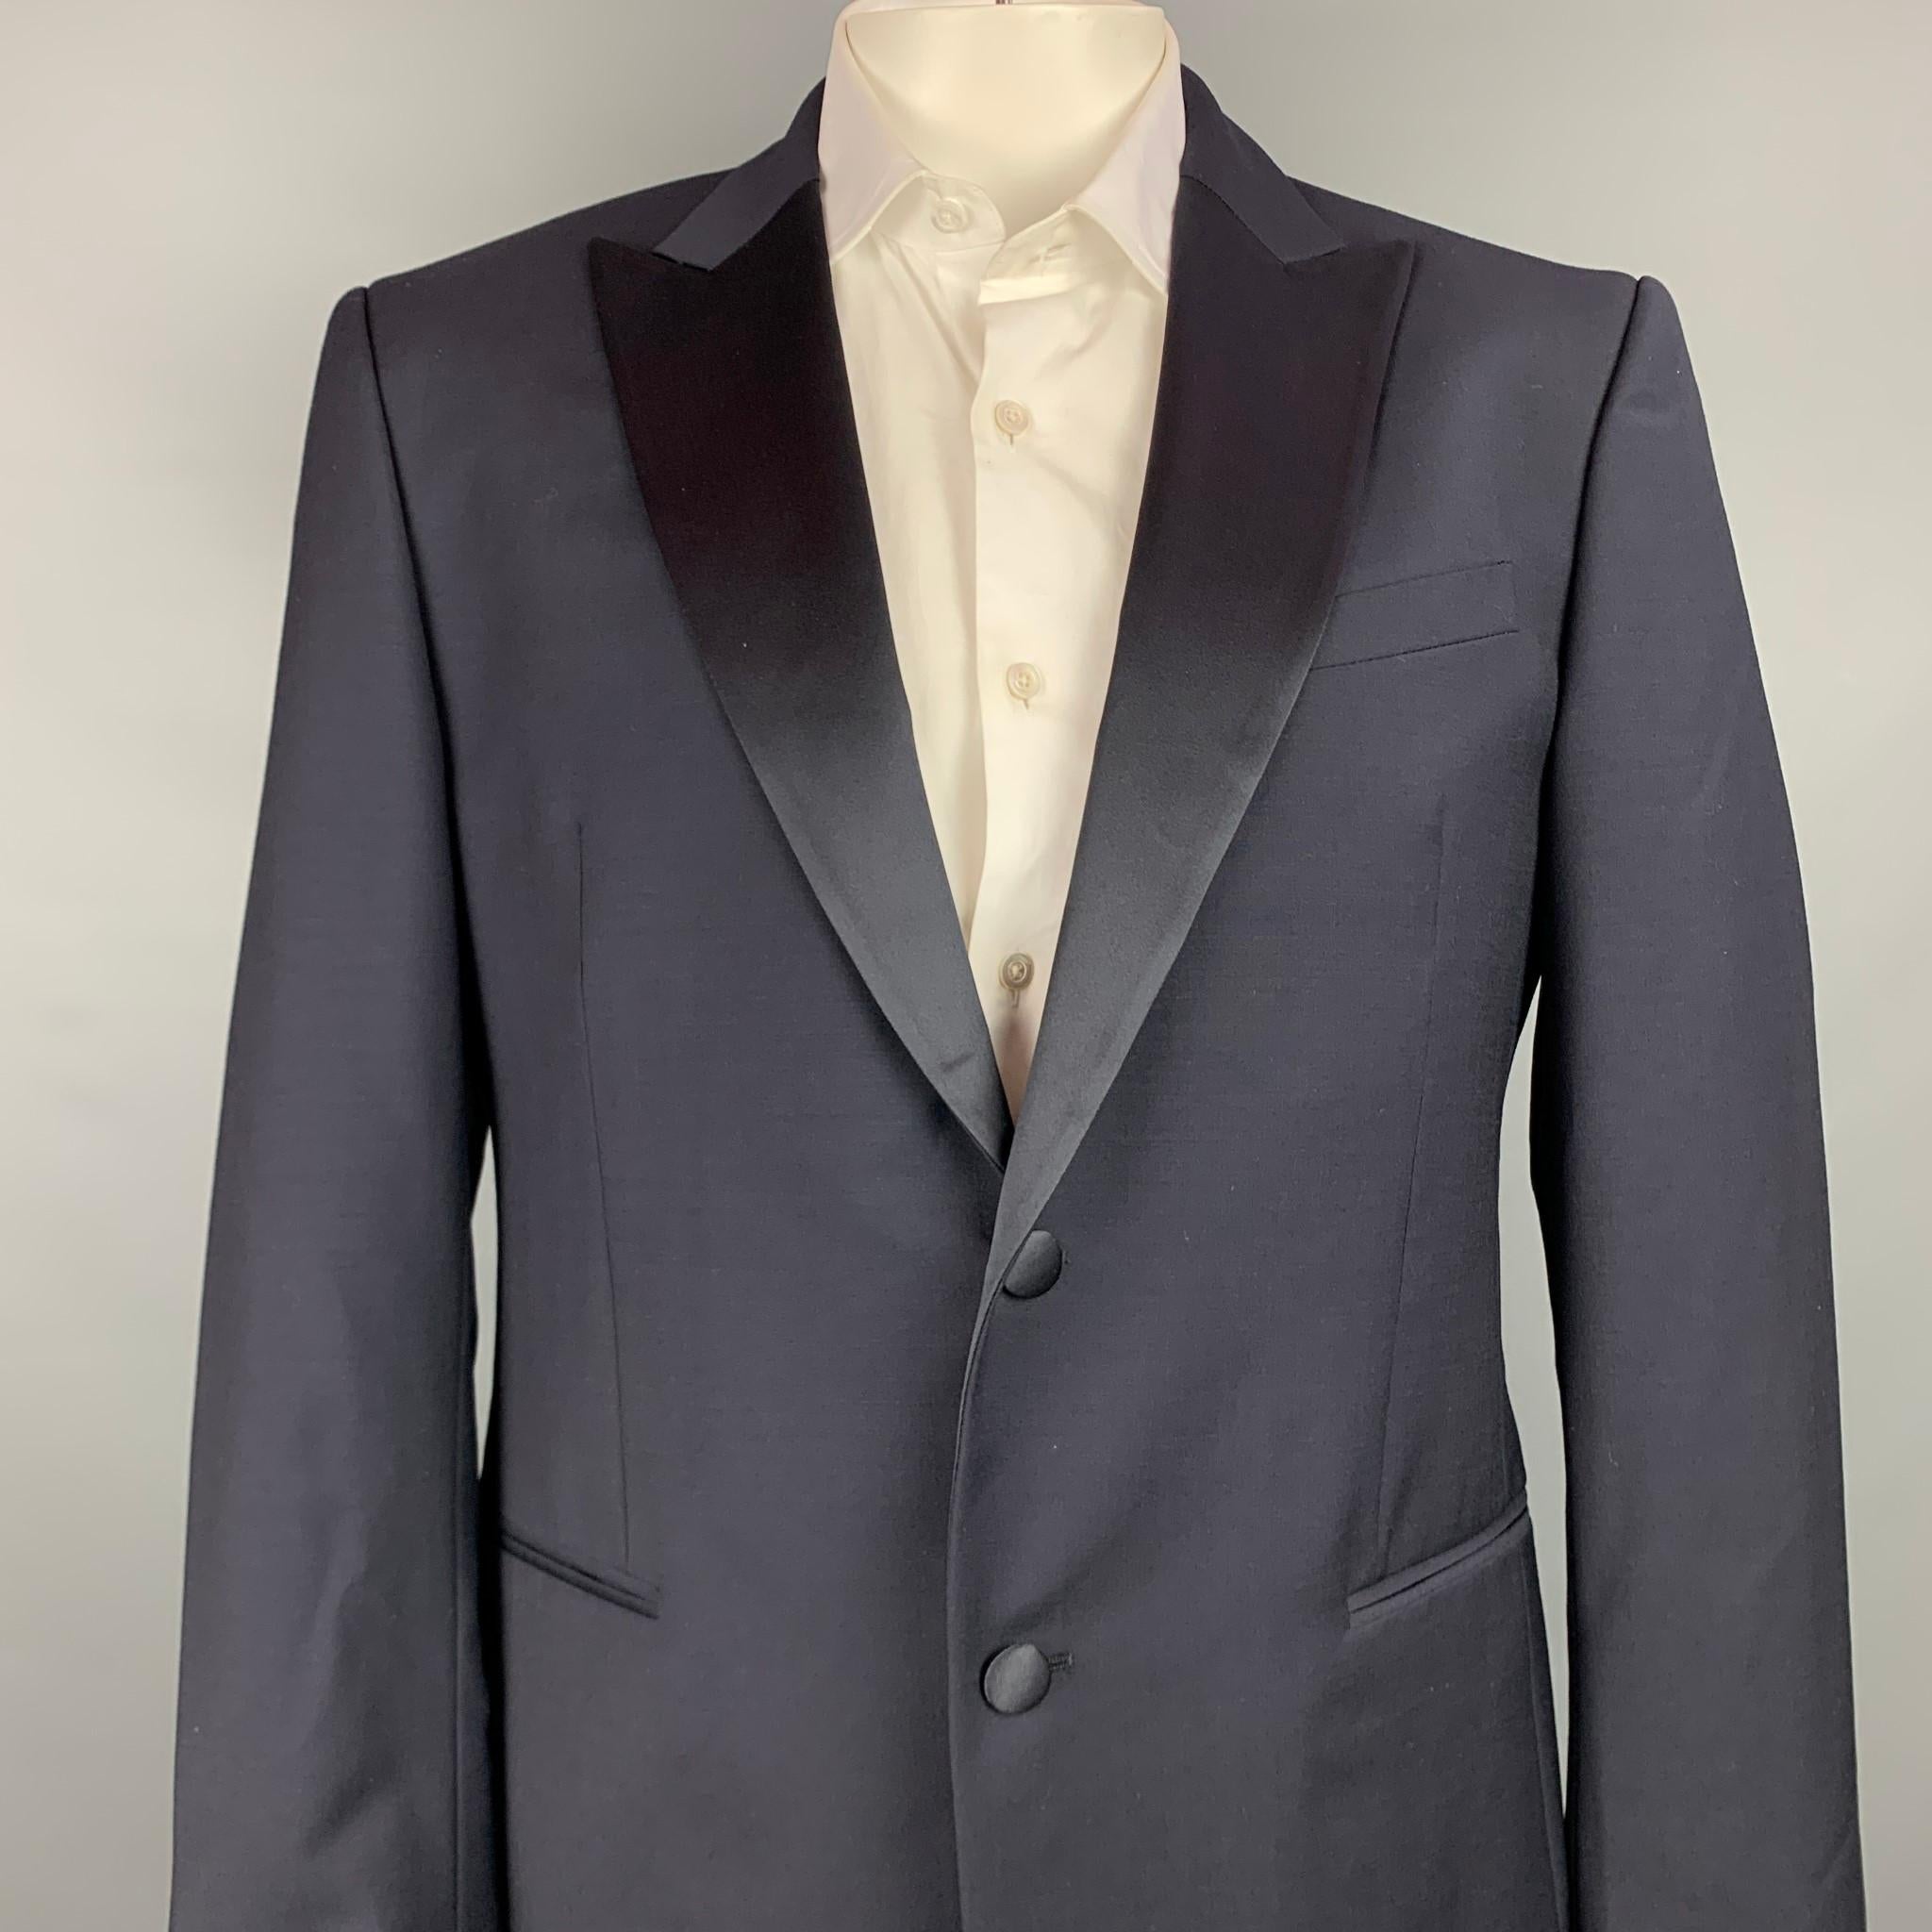 JOHN VARVATOS sport coat comes in a navy wool / mohair with a full liner featuring a peak lapel, slit pockets, and a two button closure. Made in Italy.

Very Good Pre-Owned Condition.
Marked: L 54

Measurements:

Shoulder: 19 in.
Chest: 44